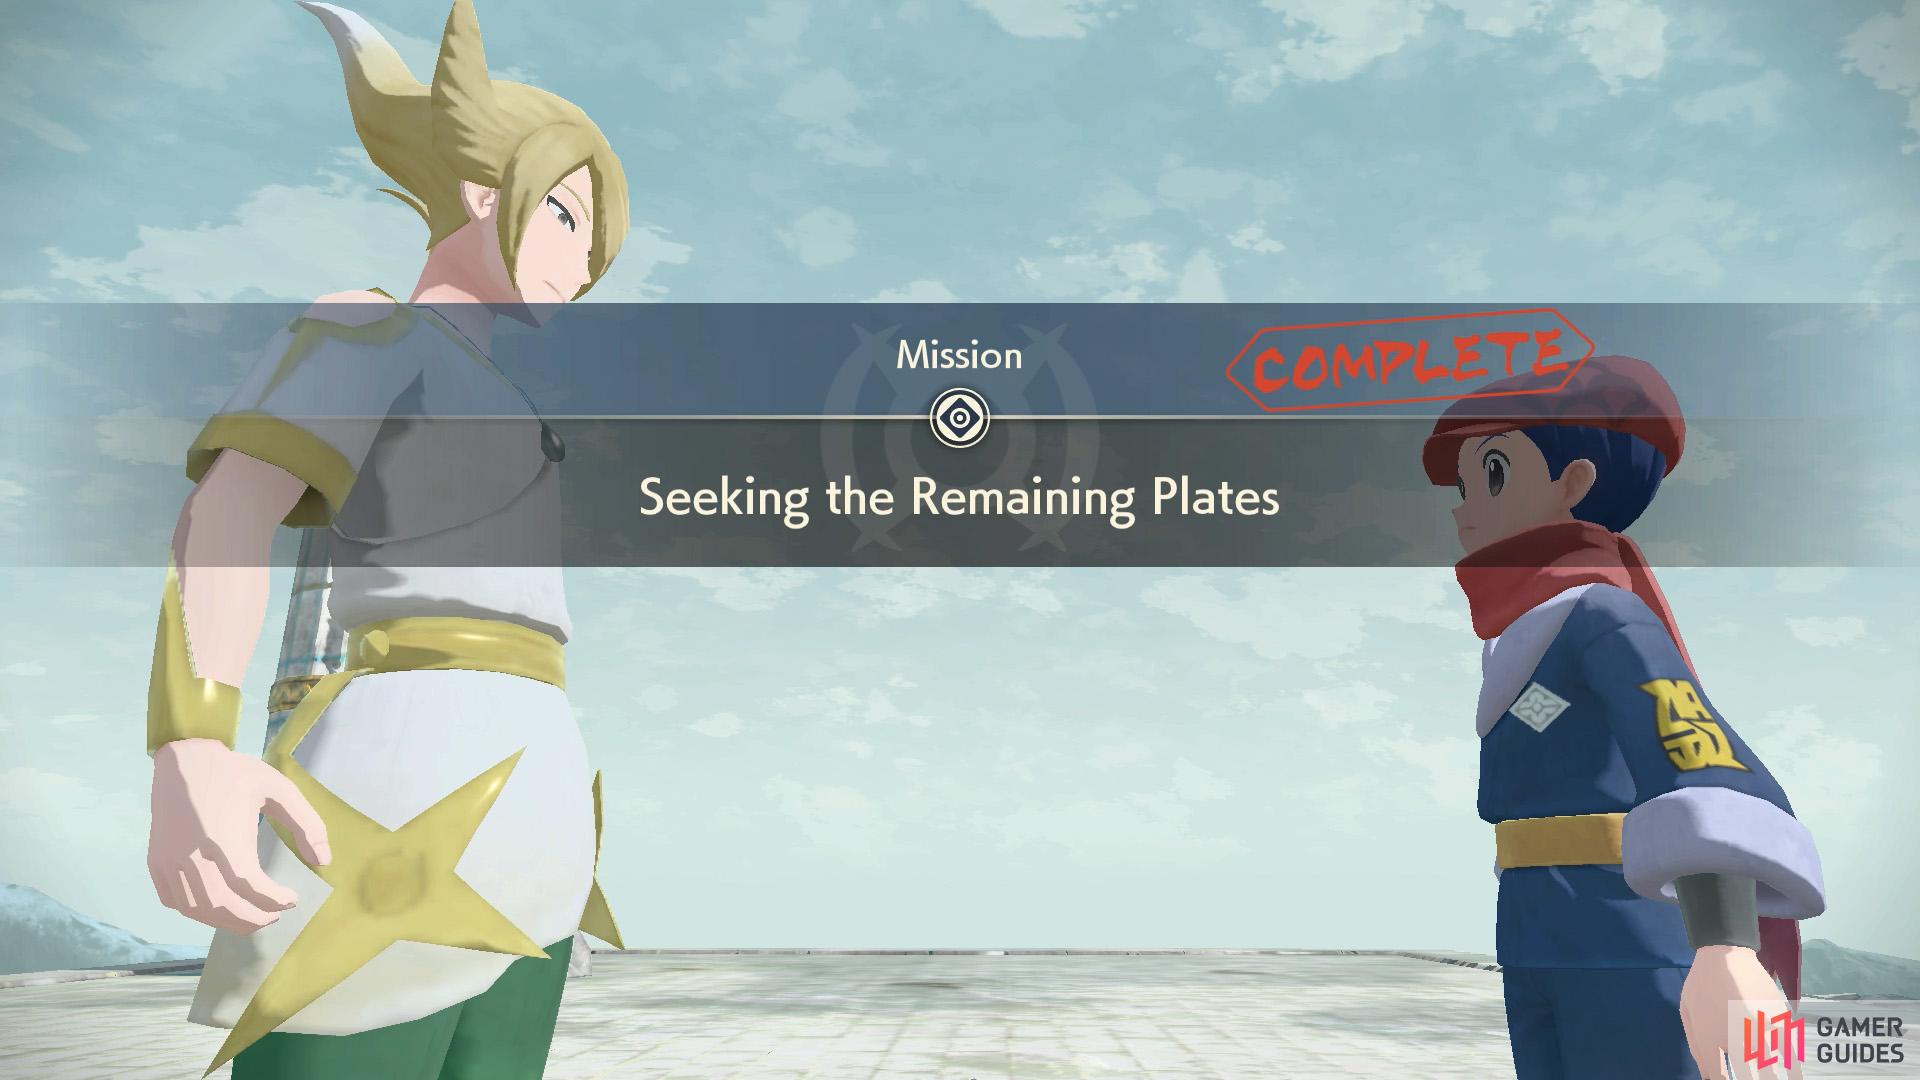 That's the final plate (to your knowledge), so this mission can be considered over.